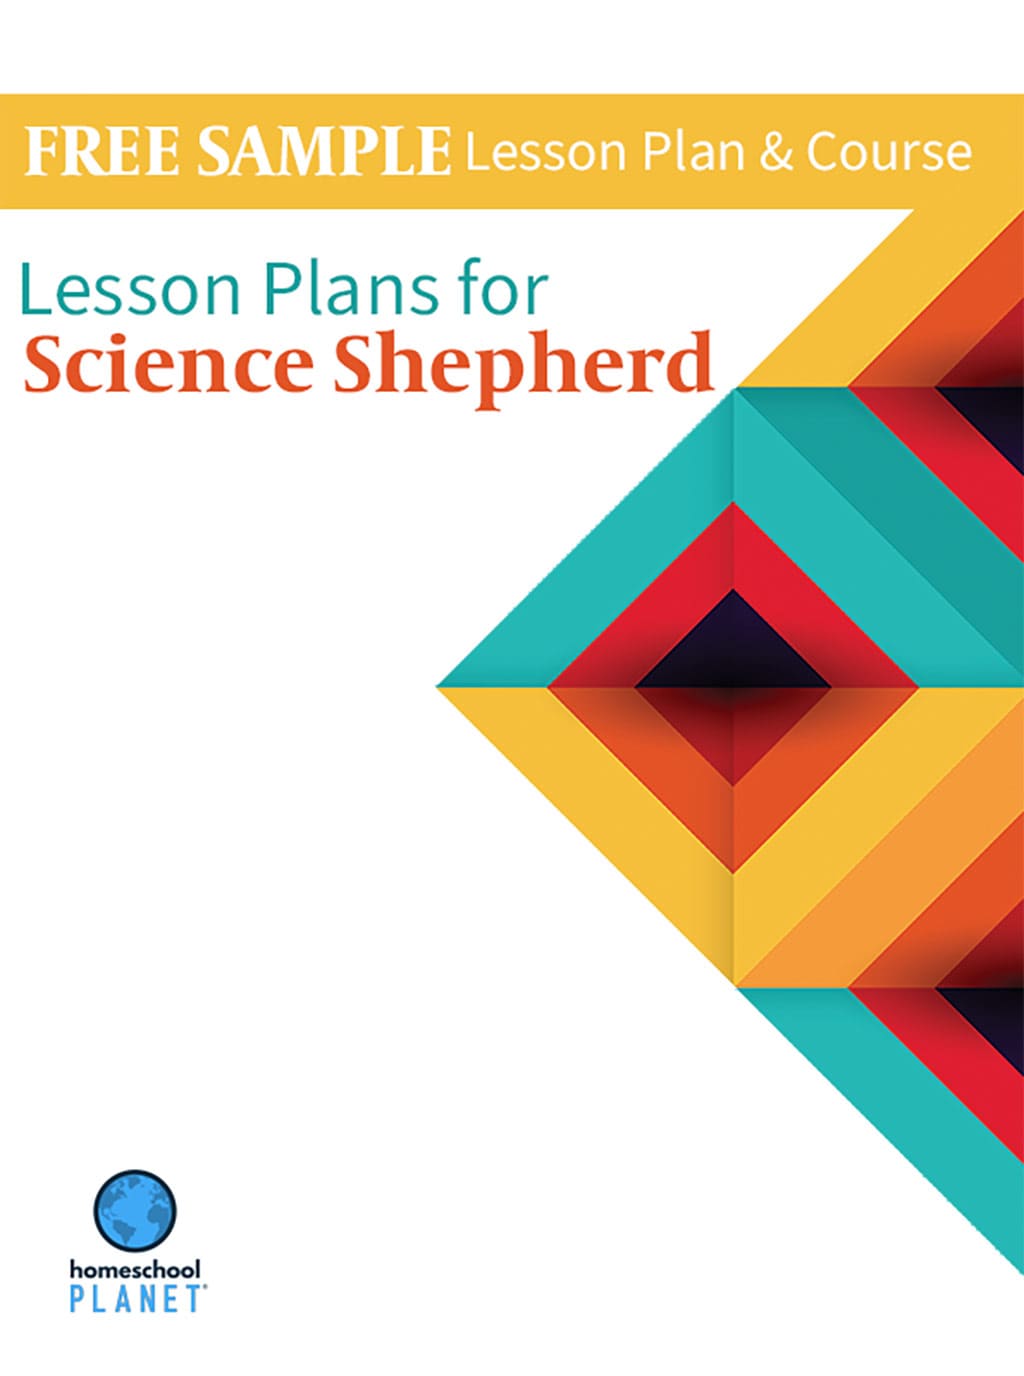 Science Shepherd free Homeschool Planet Lesson Plan cover for The Genesis Worldview